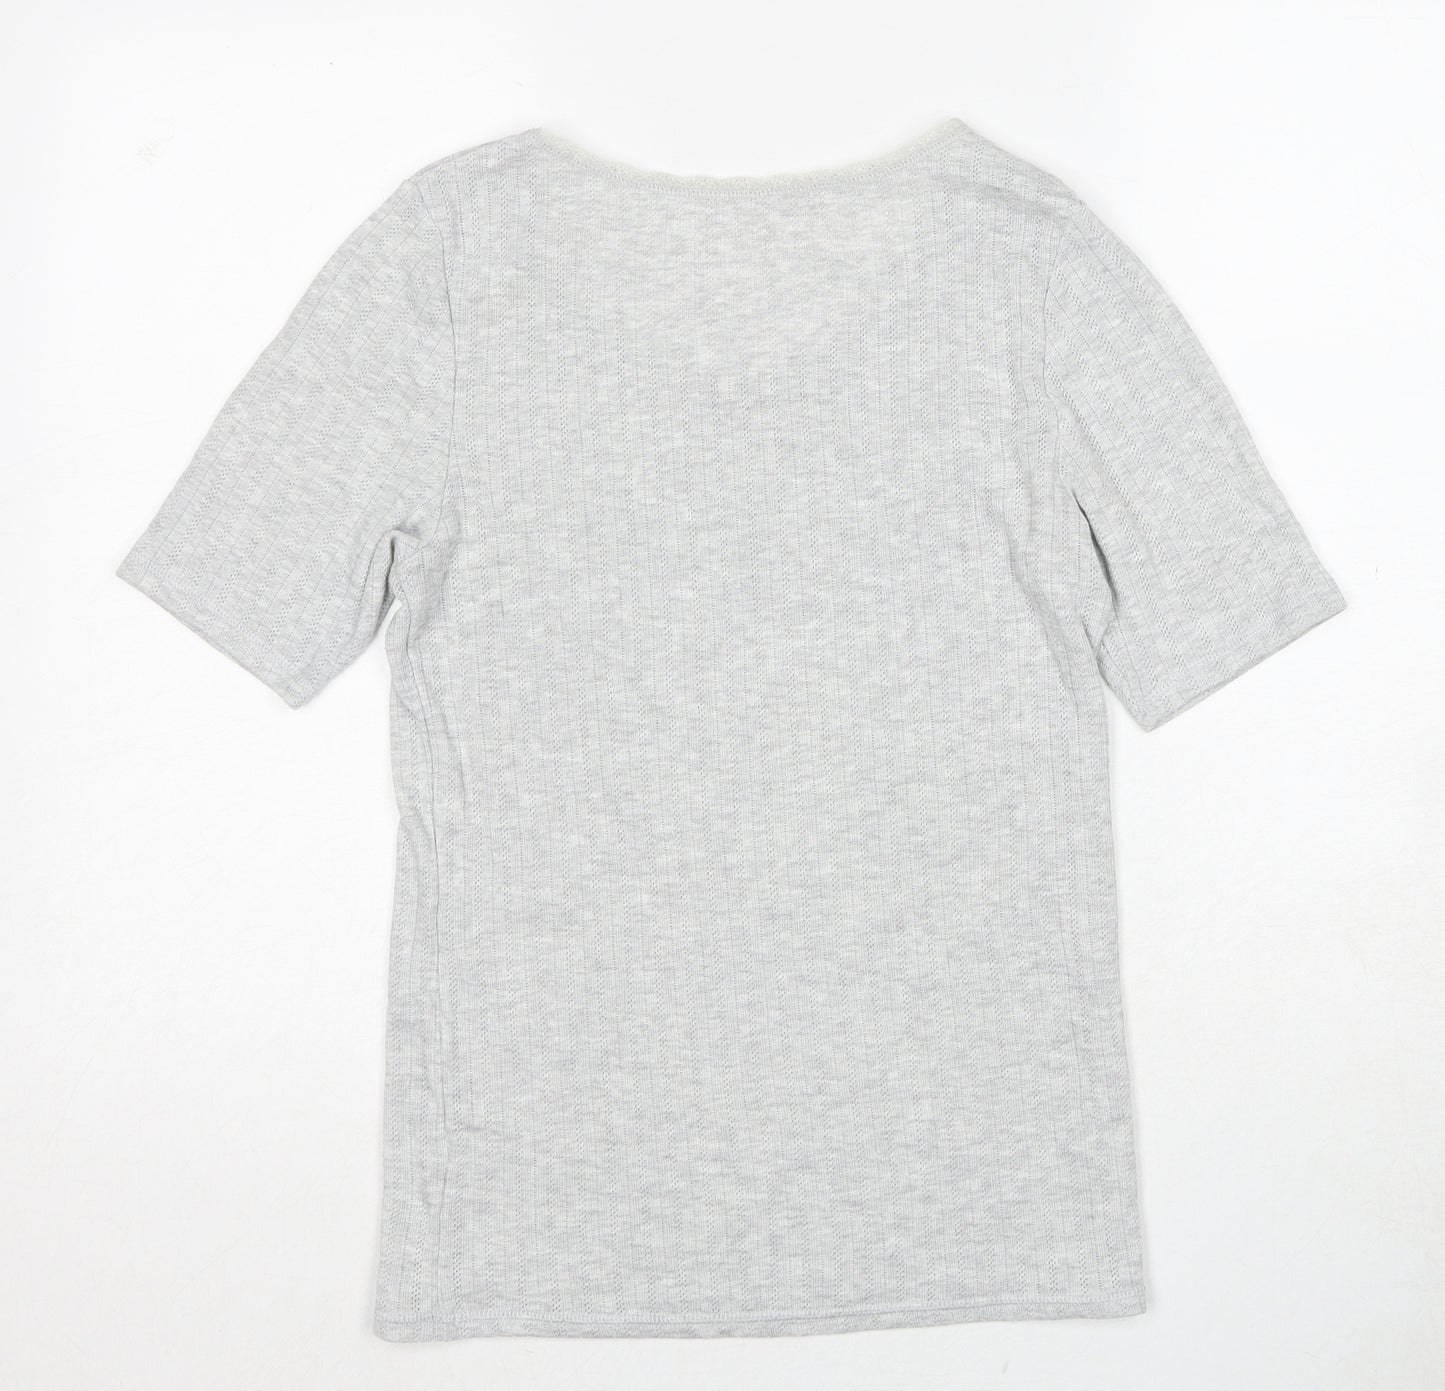 Marks and Spencer Womens Grey Viscose Basic T-Shirt Size 14 Scoop Neck